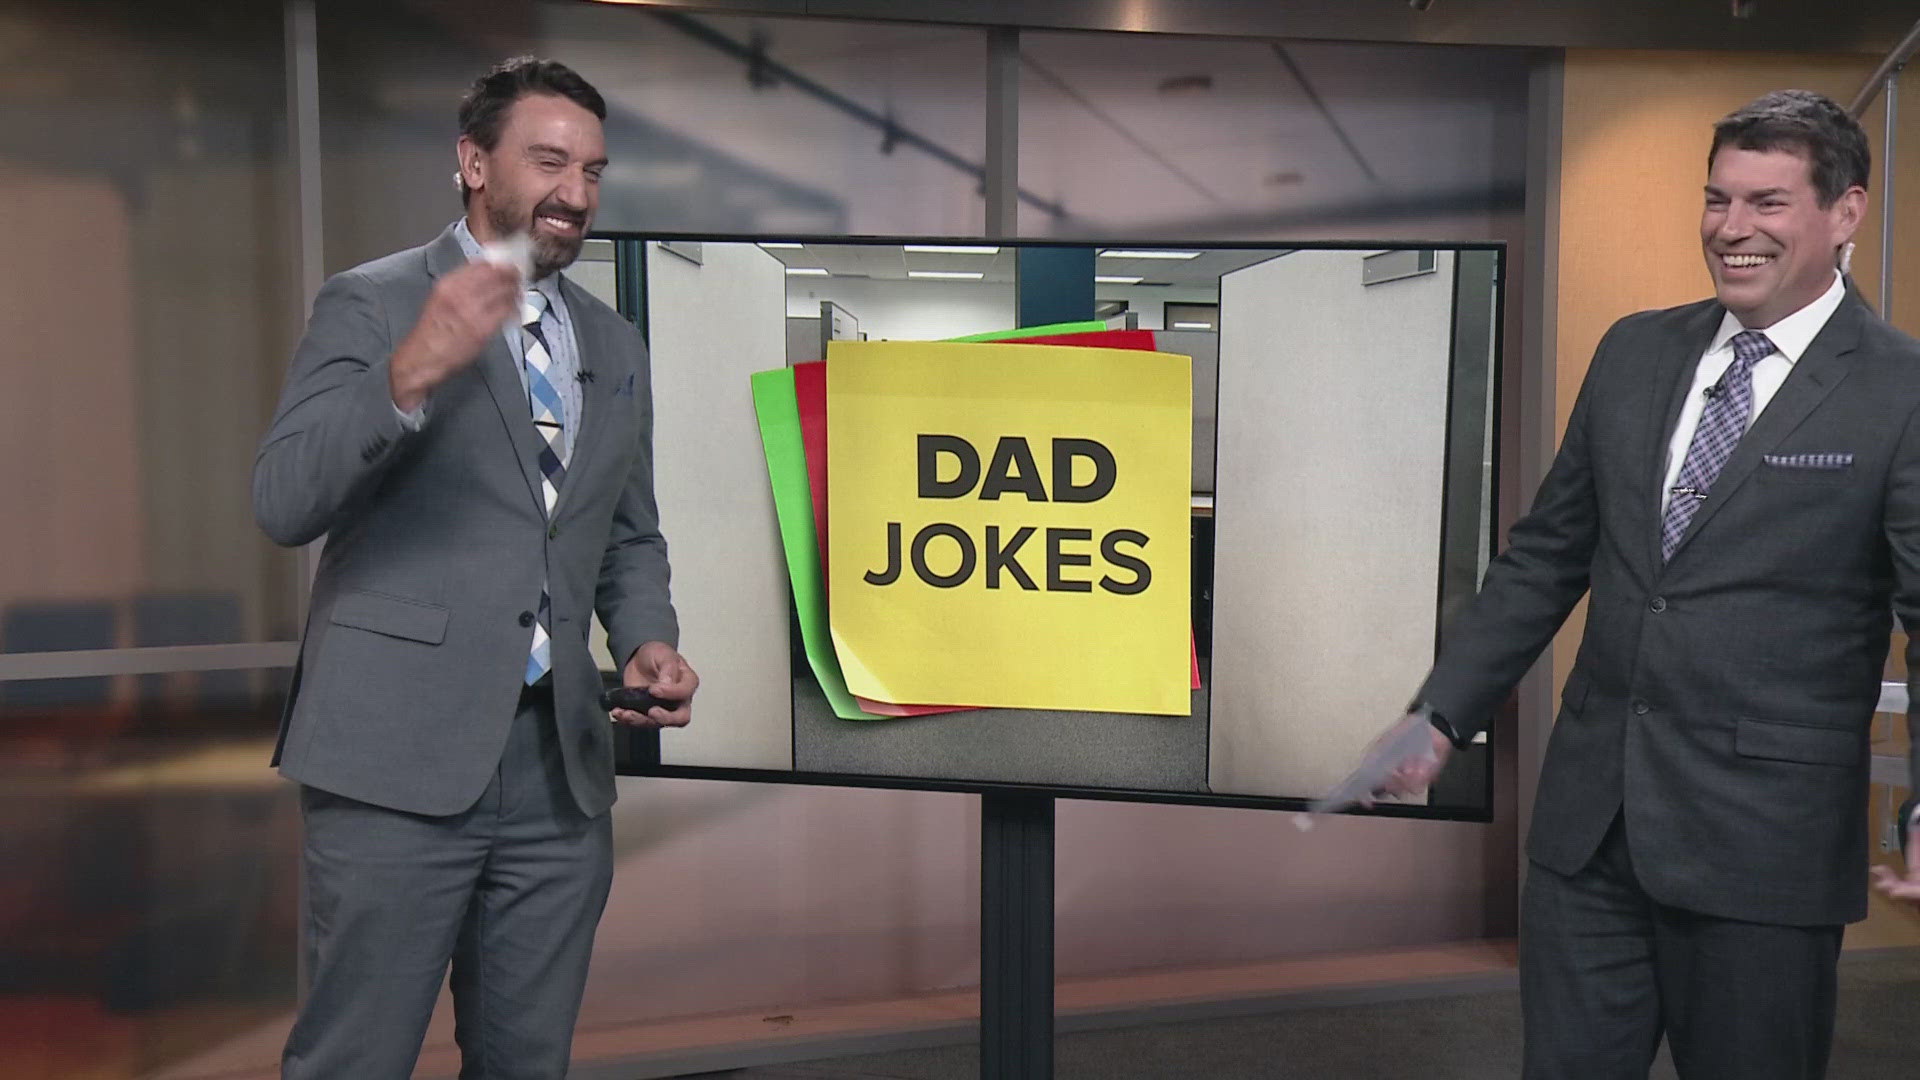 They're back! We have another dose of dad jokes with Matt Wintz and Dave Chudowsky on WKYC.